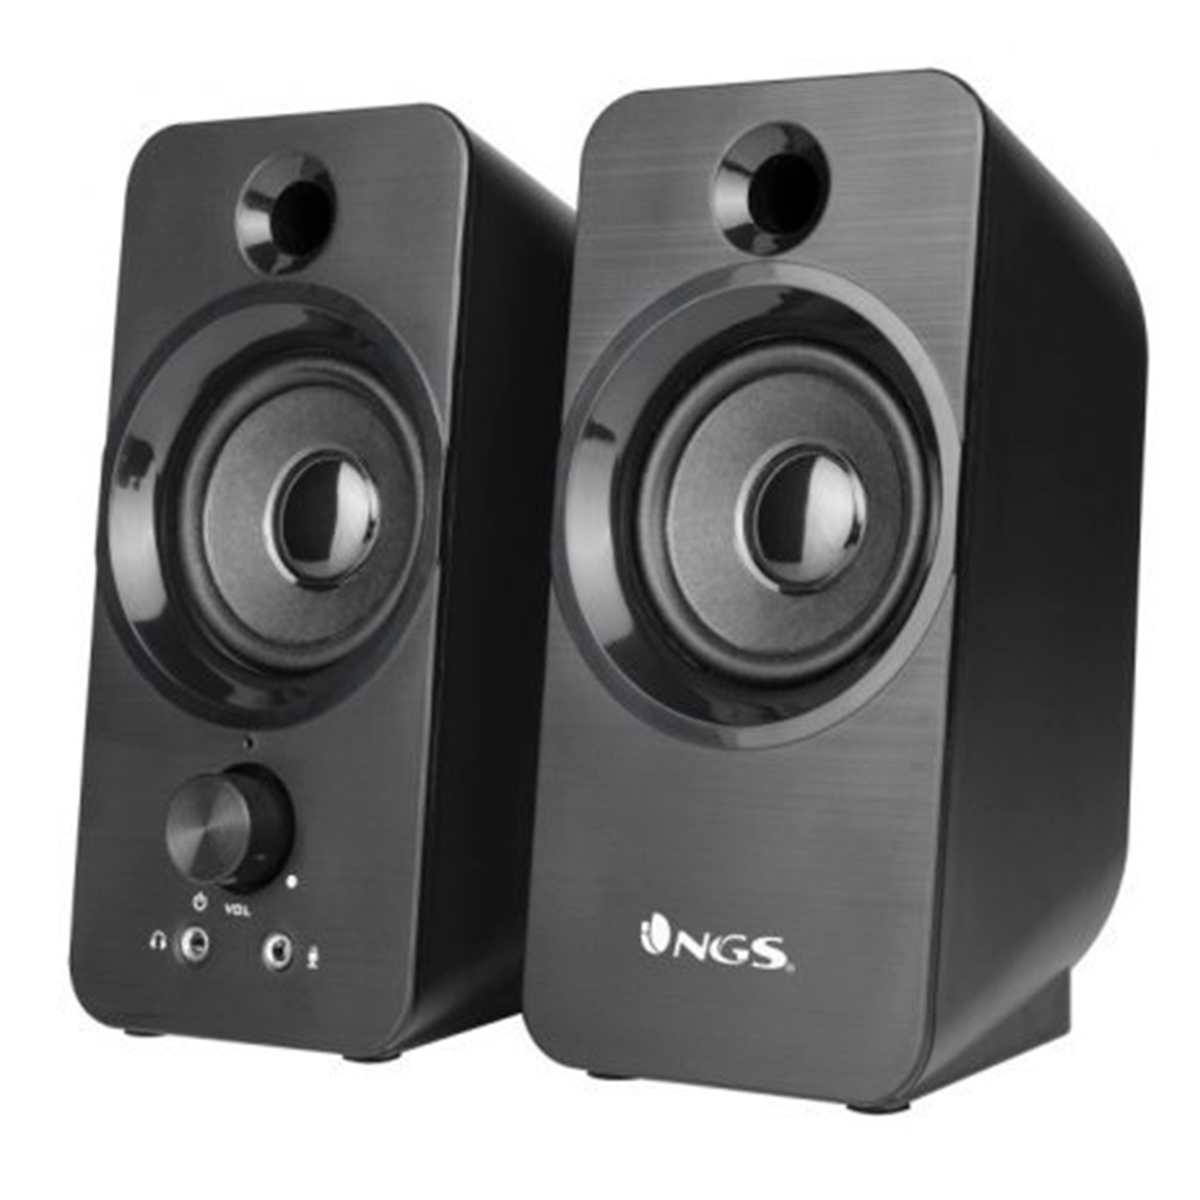 NGS ALTAVOCES USB 2.0 12W